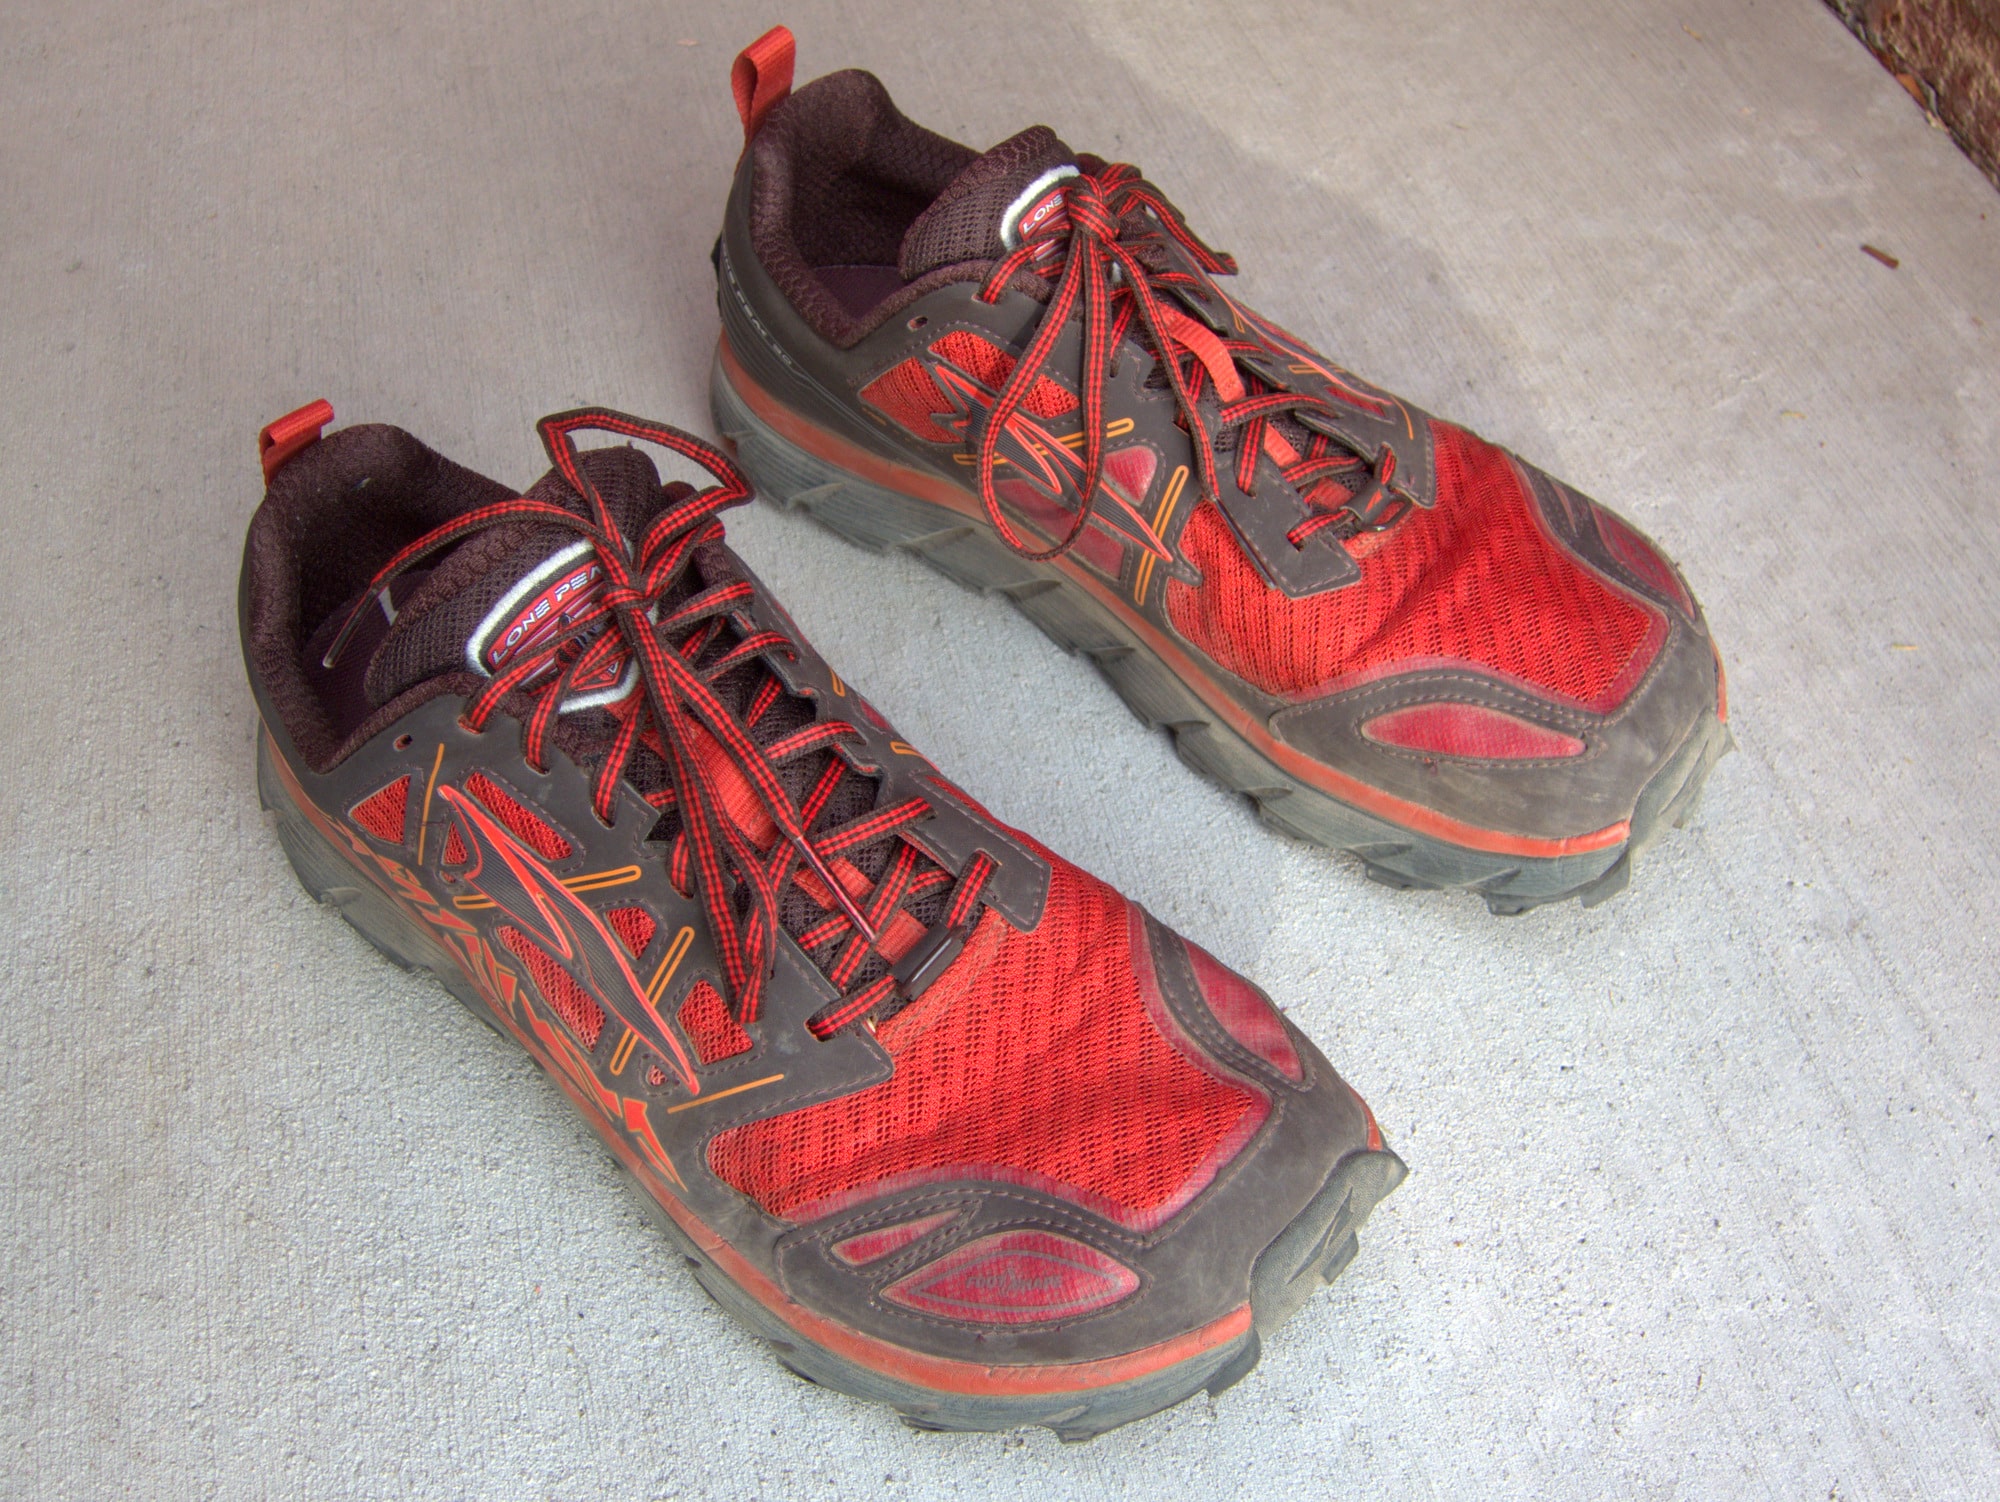 Review: Altra Lone Peak 3.0 || For wide 